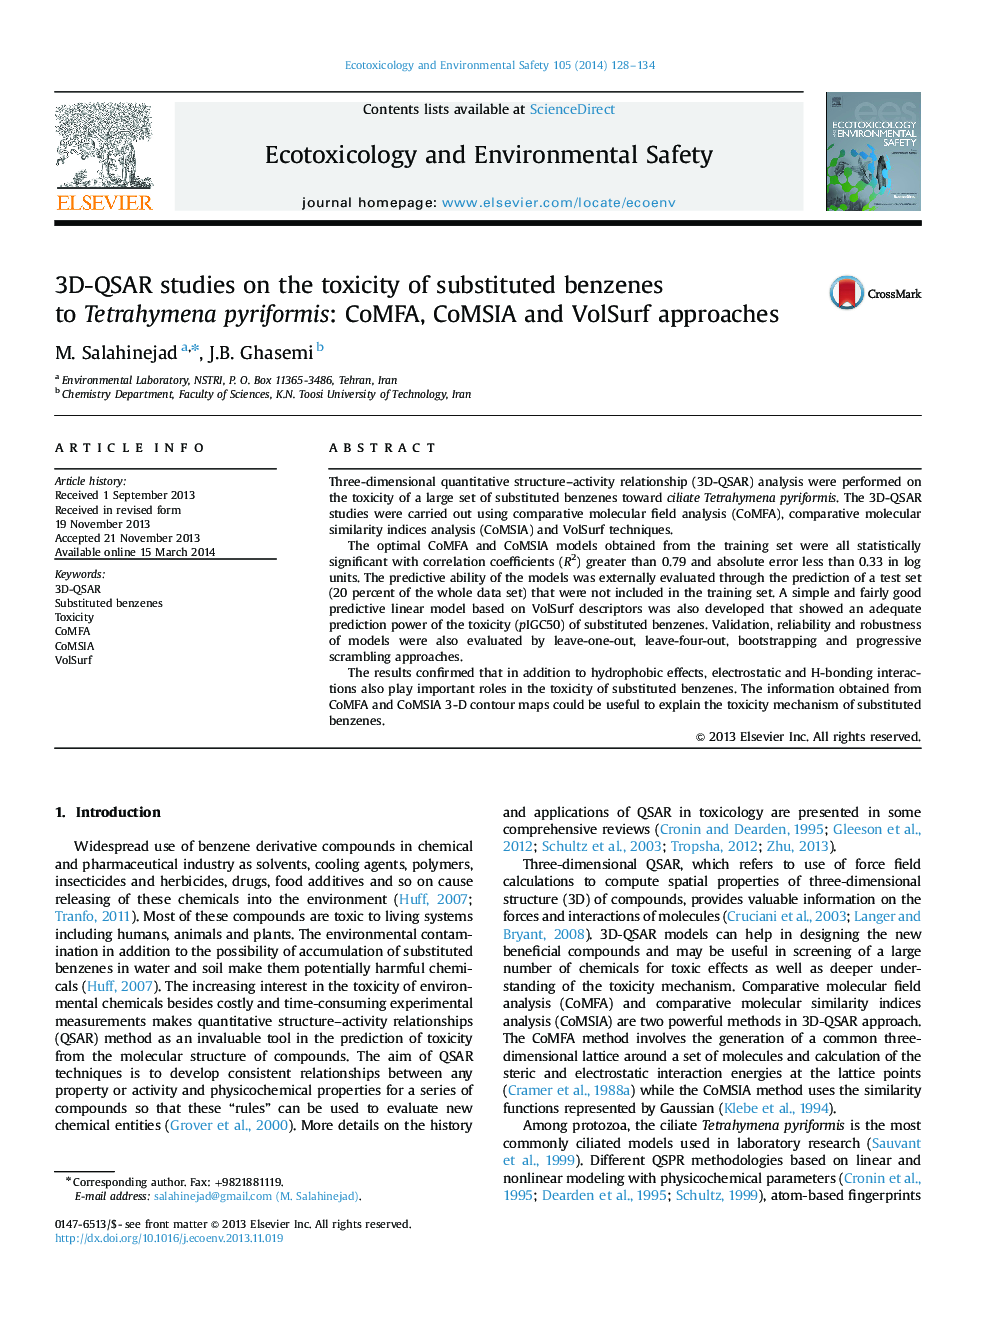 3D-QSAR studies on the toxicity of substituted benzenes to Tetrahymena pyriformis: CoMFA, CoMSIA and VolSurf approaches